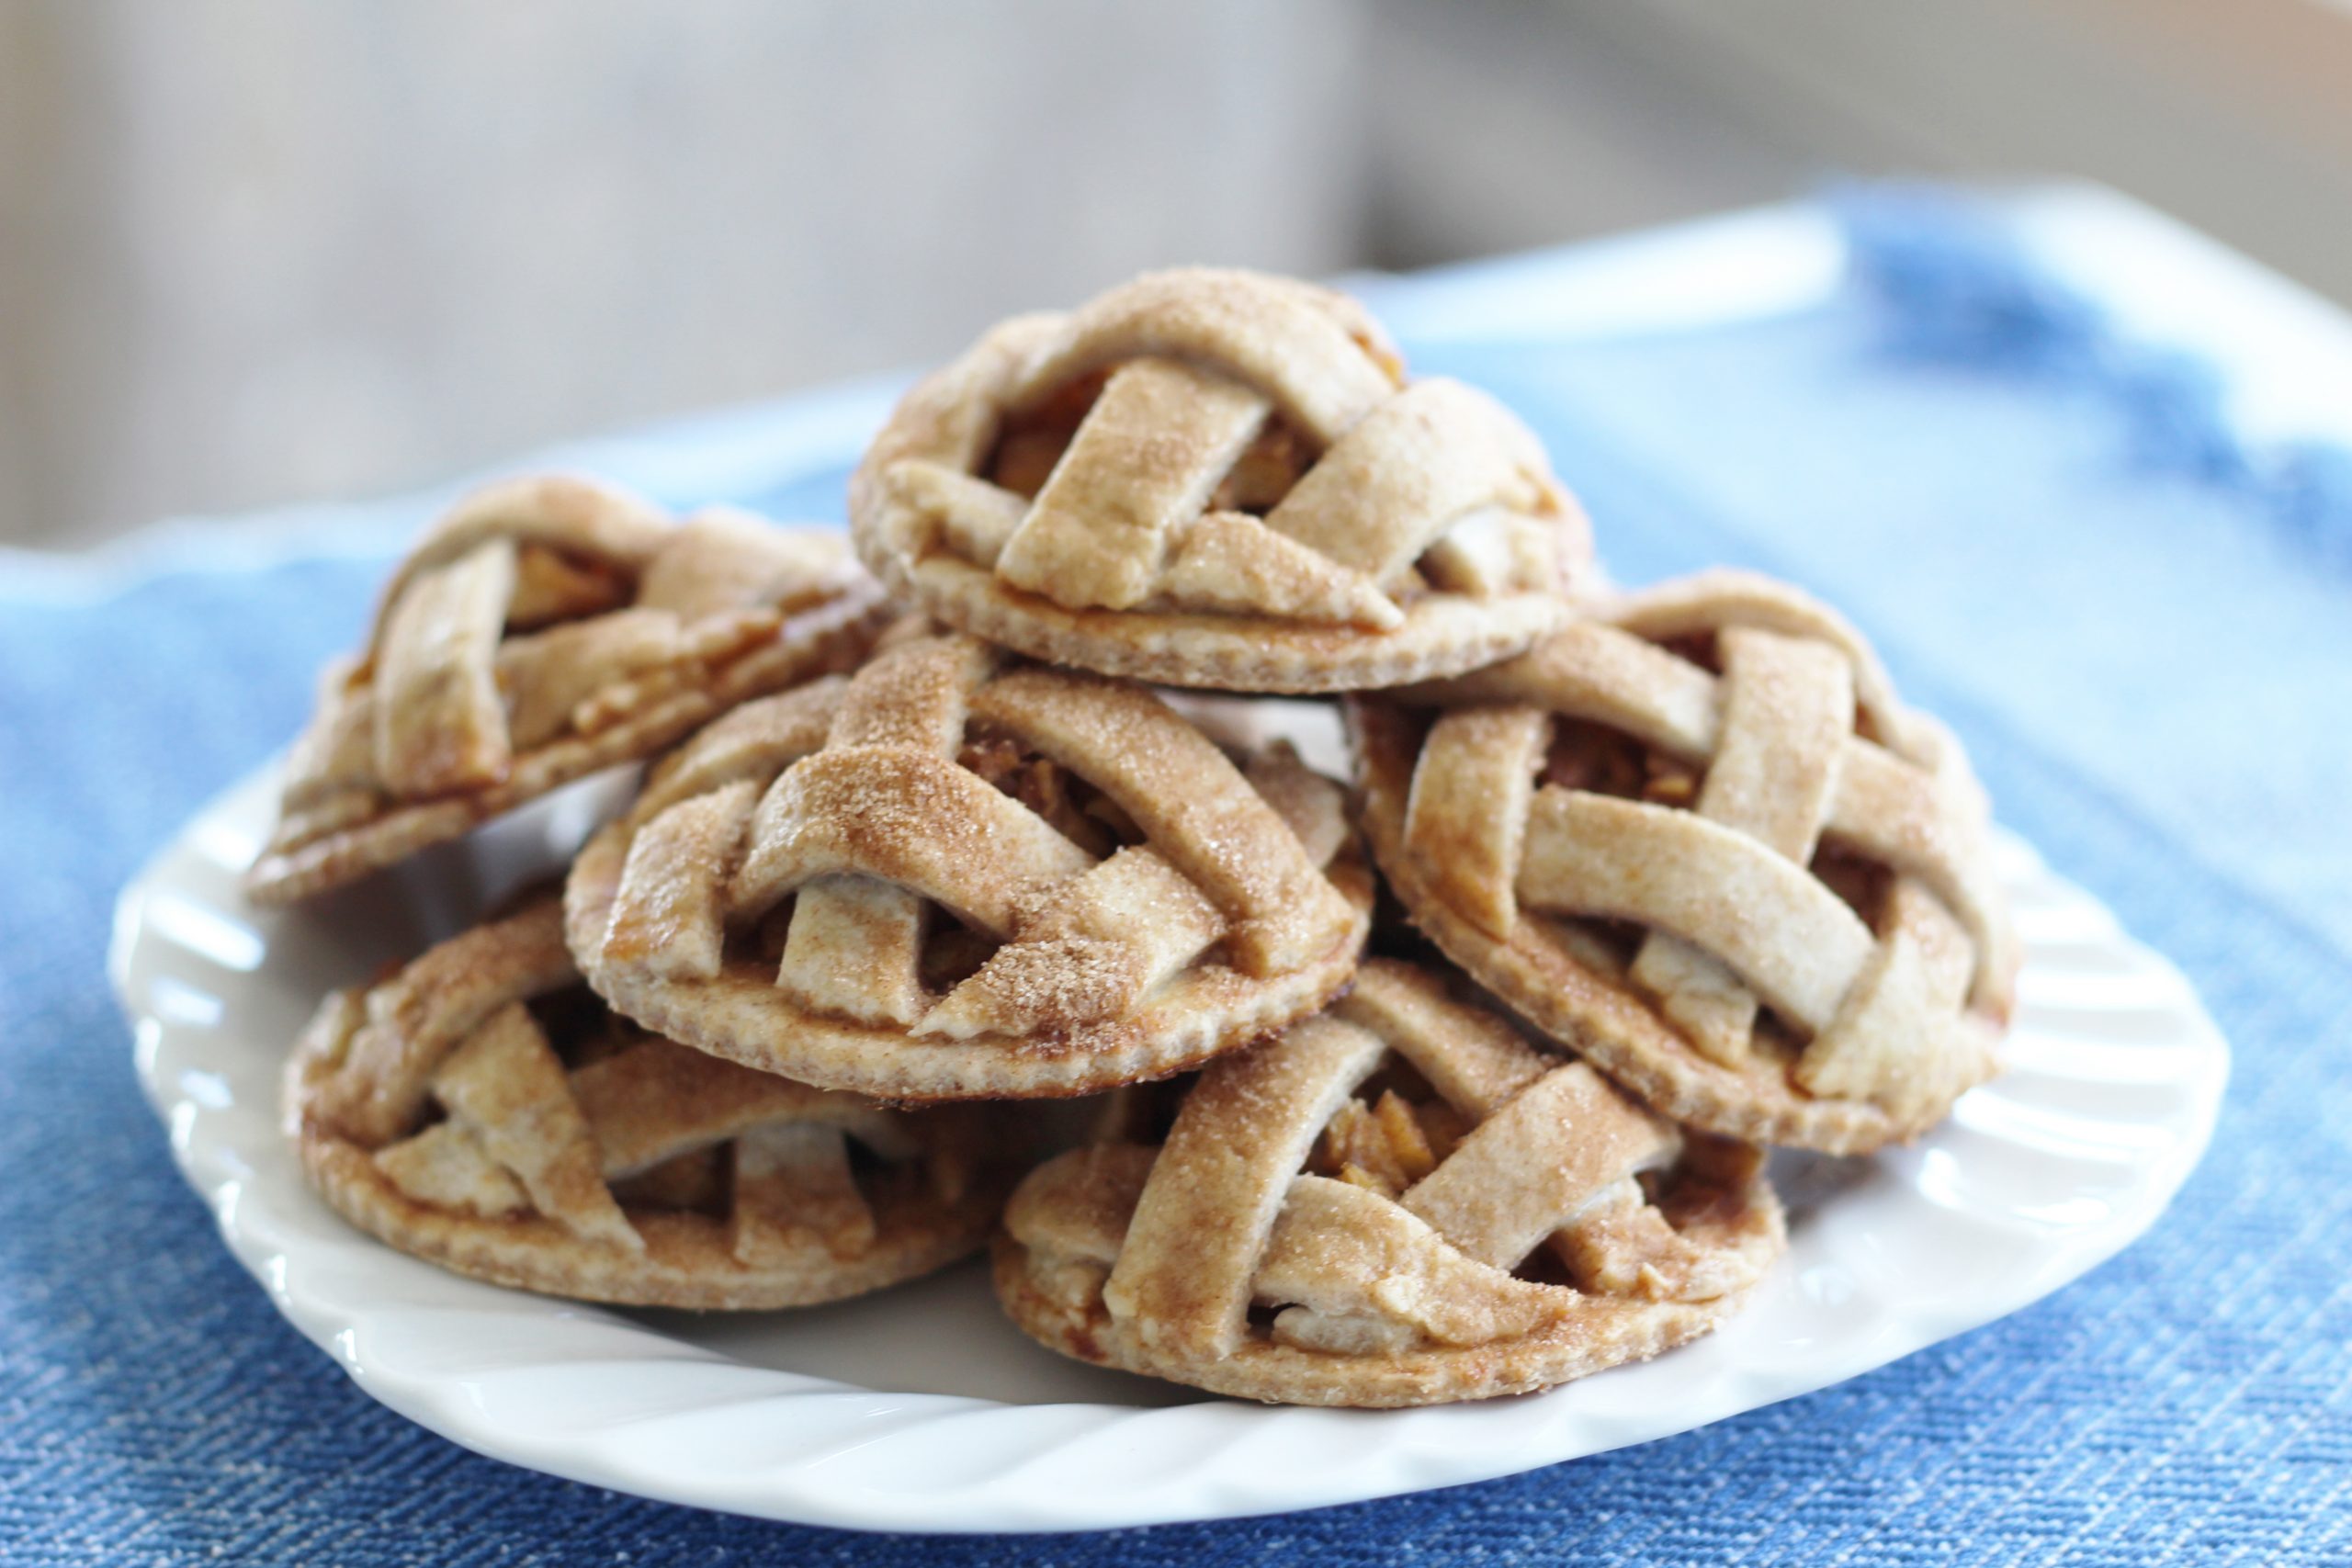 Blue Ribbon Apple Pie Cookies Plated, Shown Close Up